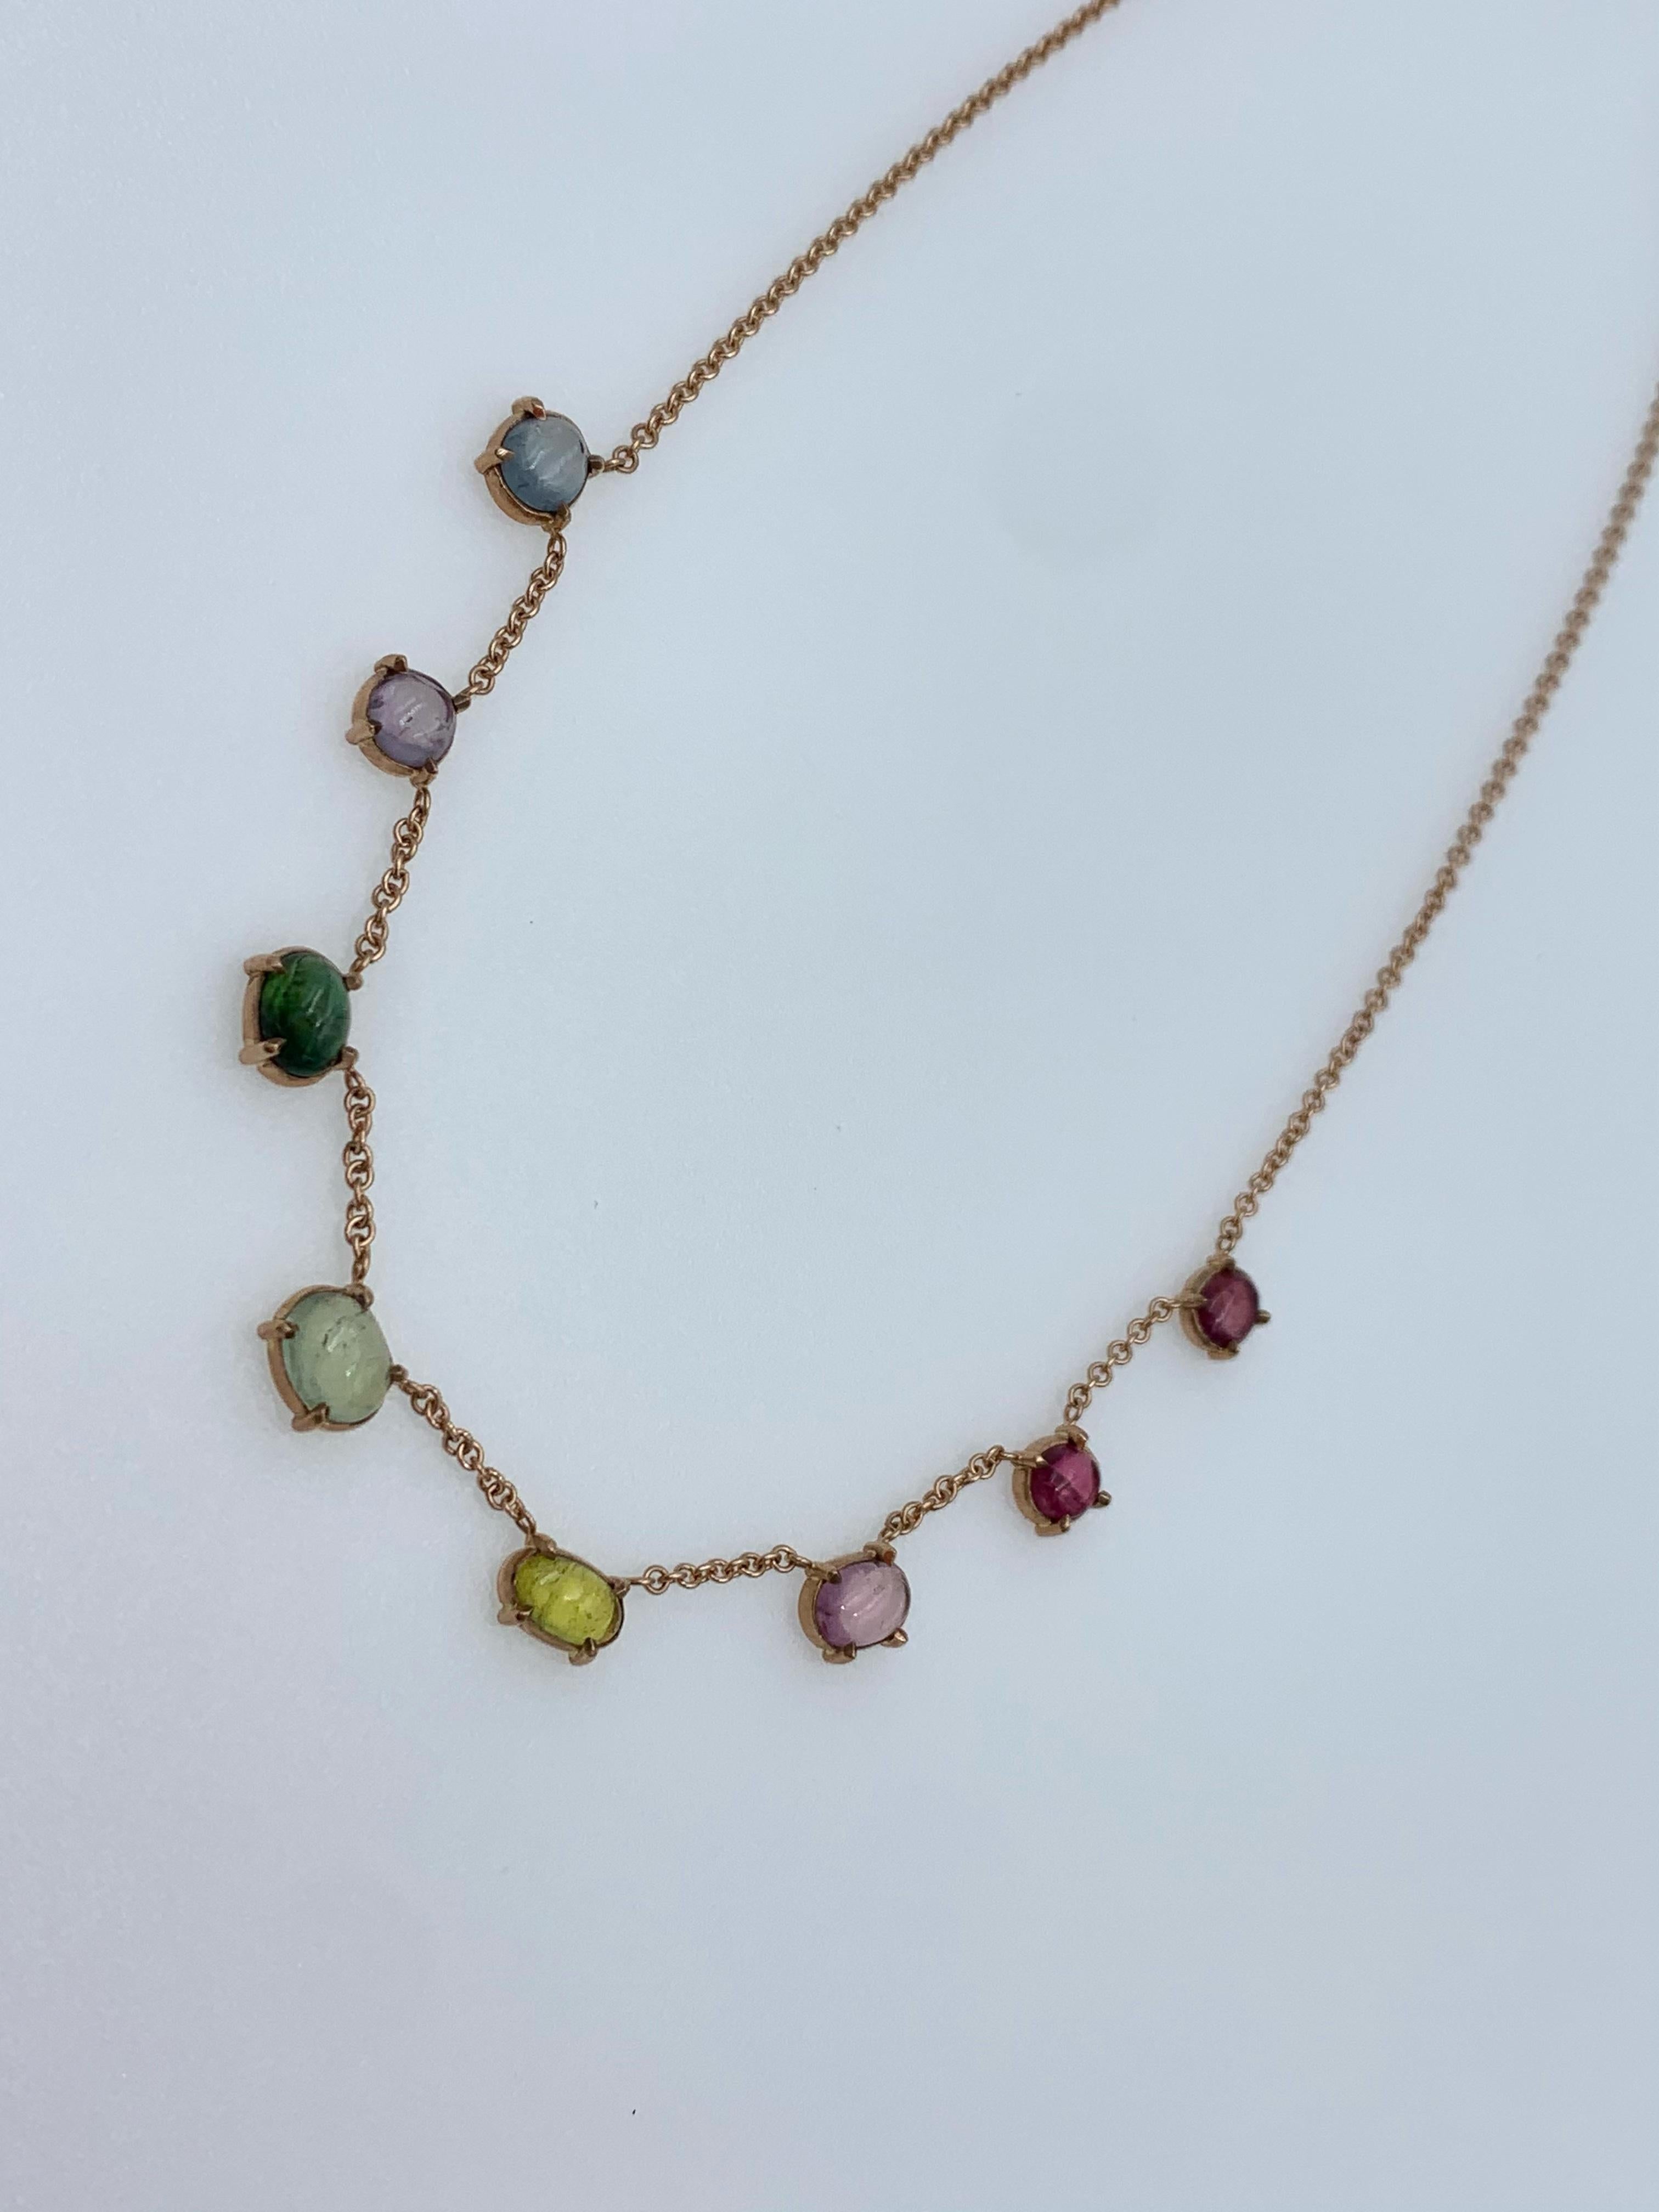 Hand made 9 karat Rose gold 8 stone varied rainbow (indigo, lilac, dark green, light green, yellow, pink, red and burgundy) Tourmaline and Spinel chain choker necklace which can be worn at two lengths 16/15 inch depending on and easily used for